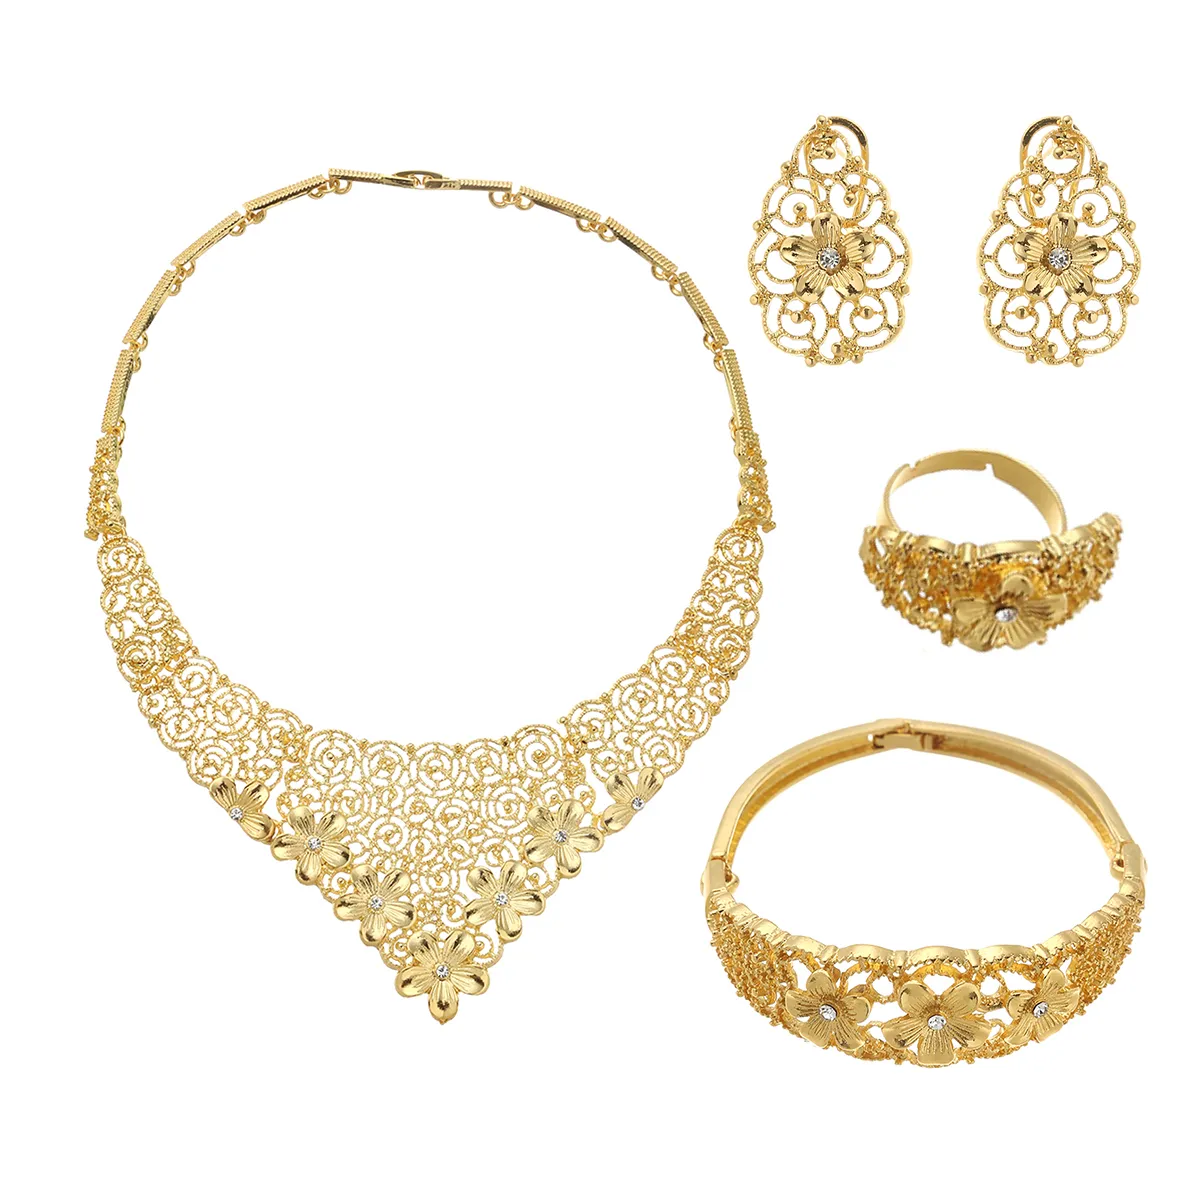 Dubai Gold African Bridal Jewelry Sets Wedding Gifts For Women Saudi Arab Necklace Bracelet Earrings Ring Jewelry Set